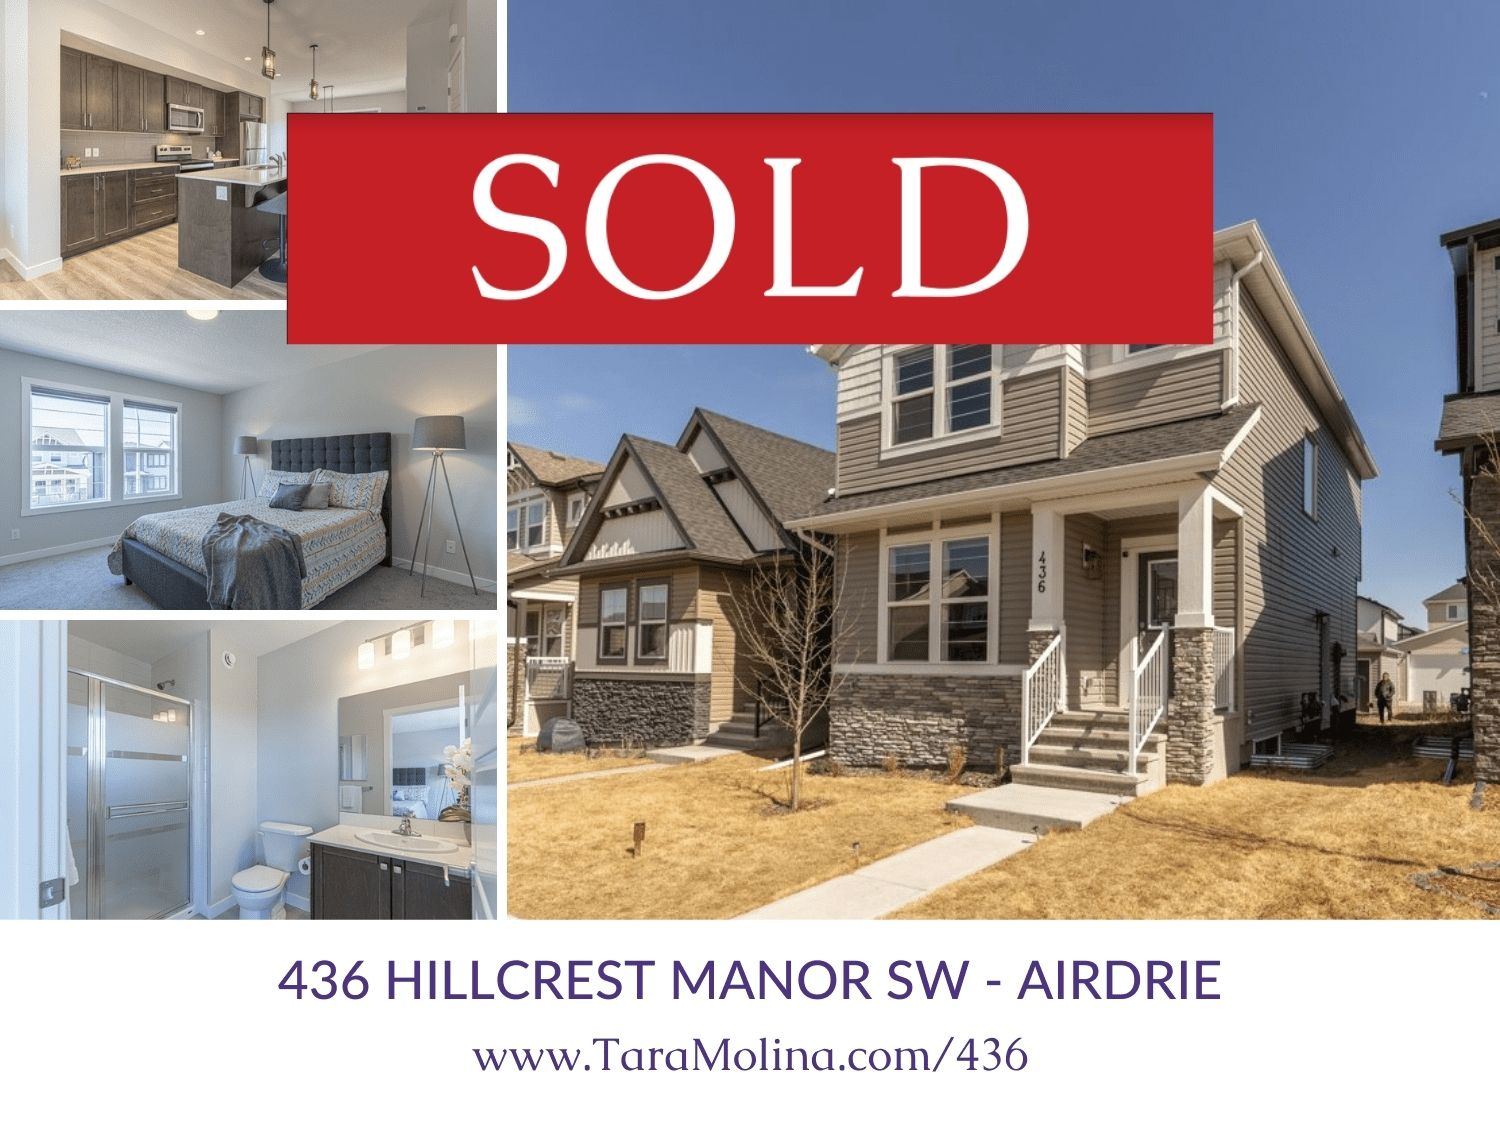 Sold by Tara Molina Realtor in Calgary and Airdrie